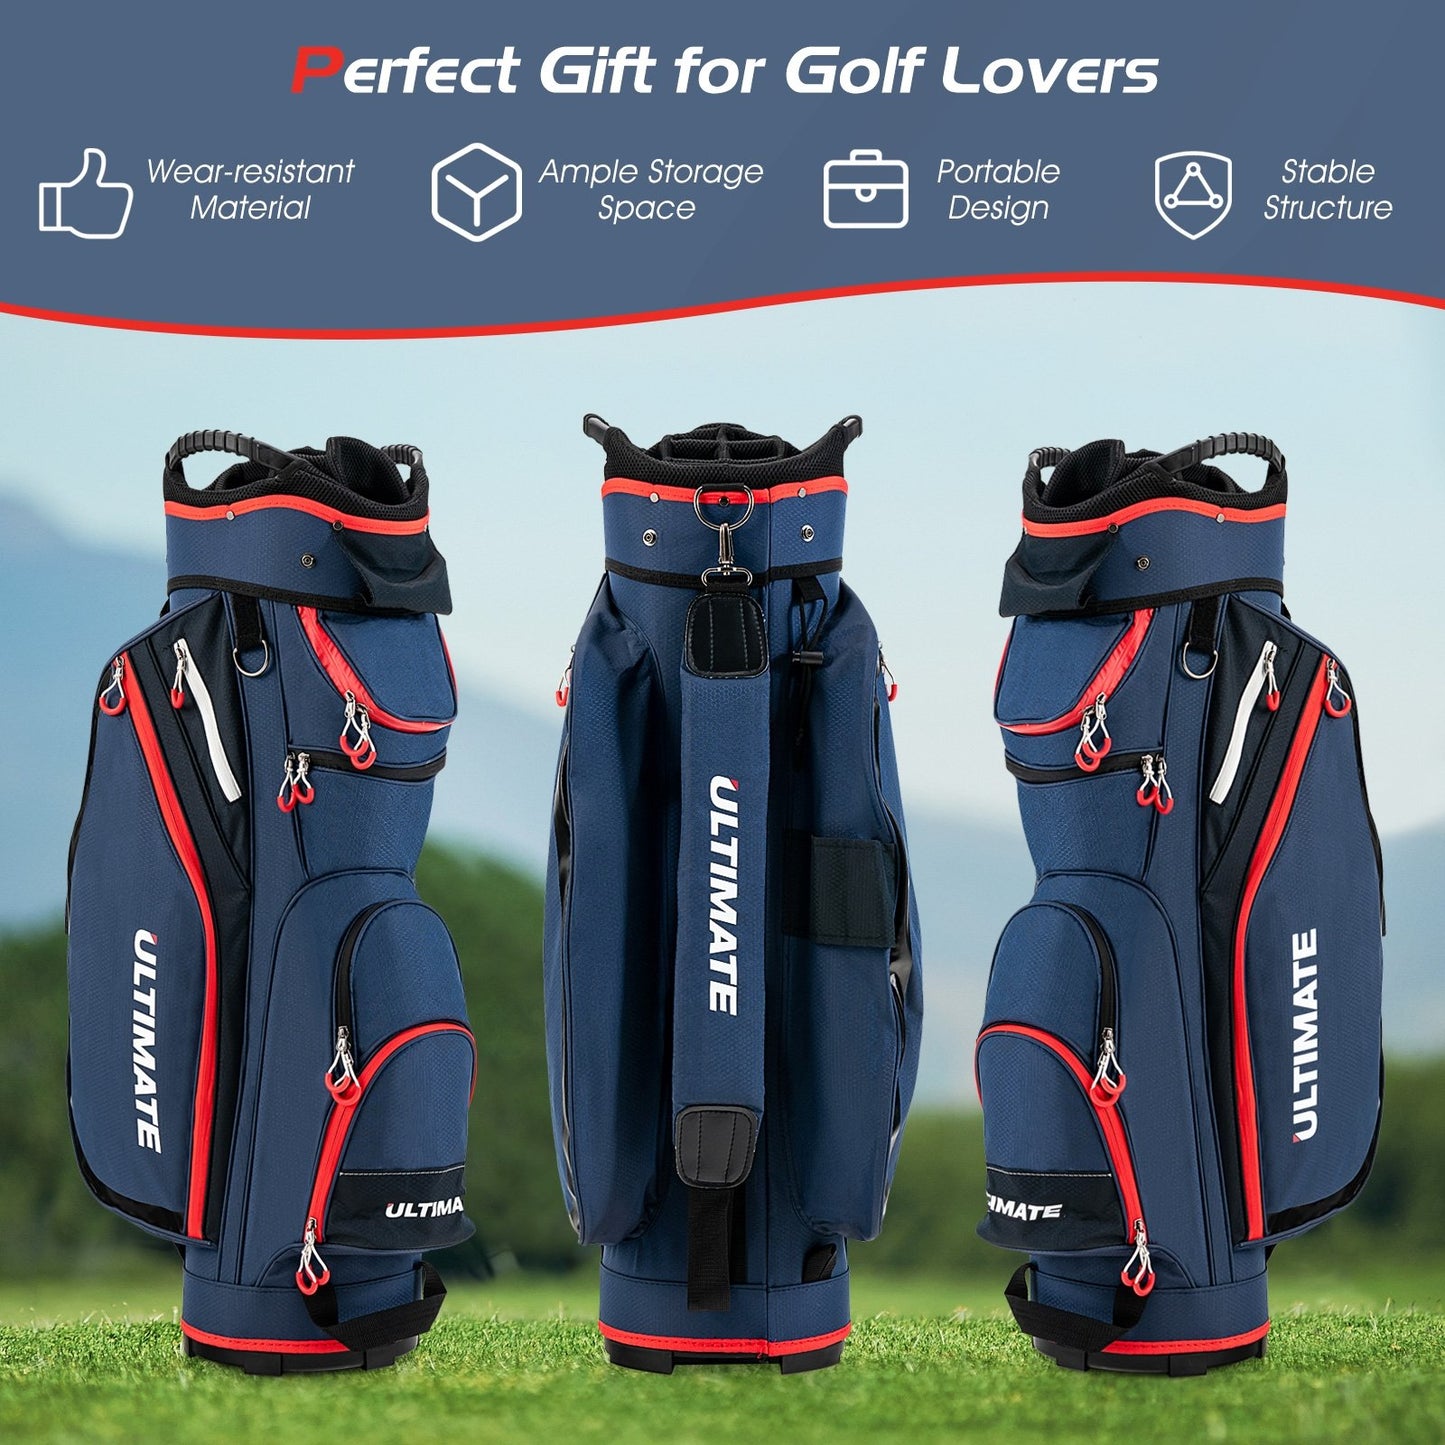 Lightweight and Large Capacity Golf Stand Bag, Navy at Gallery Canada